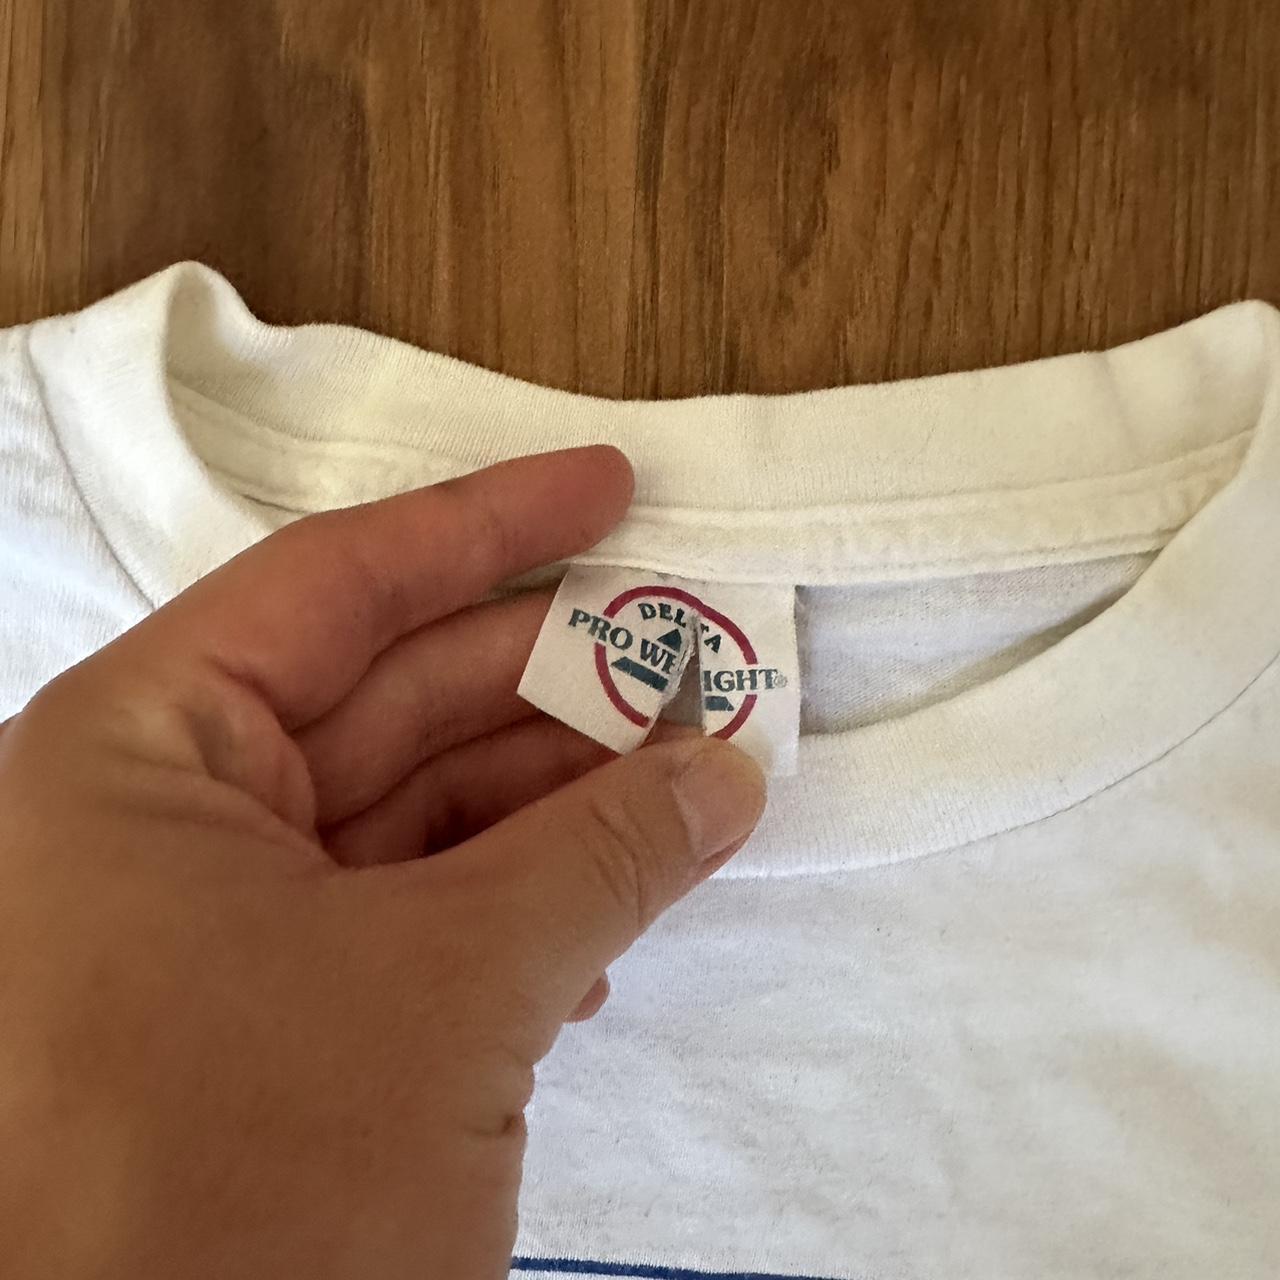 Vintage dodgers jersey Is a size XL in kids but can - Depop